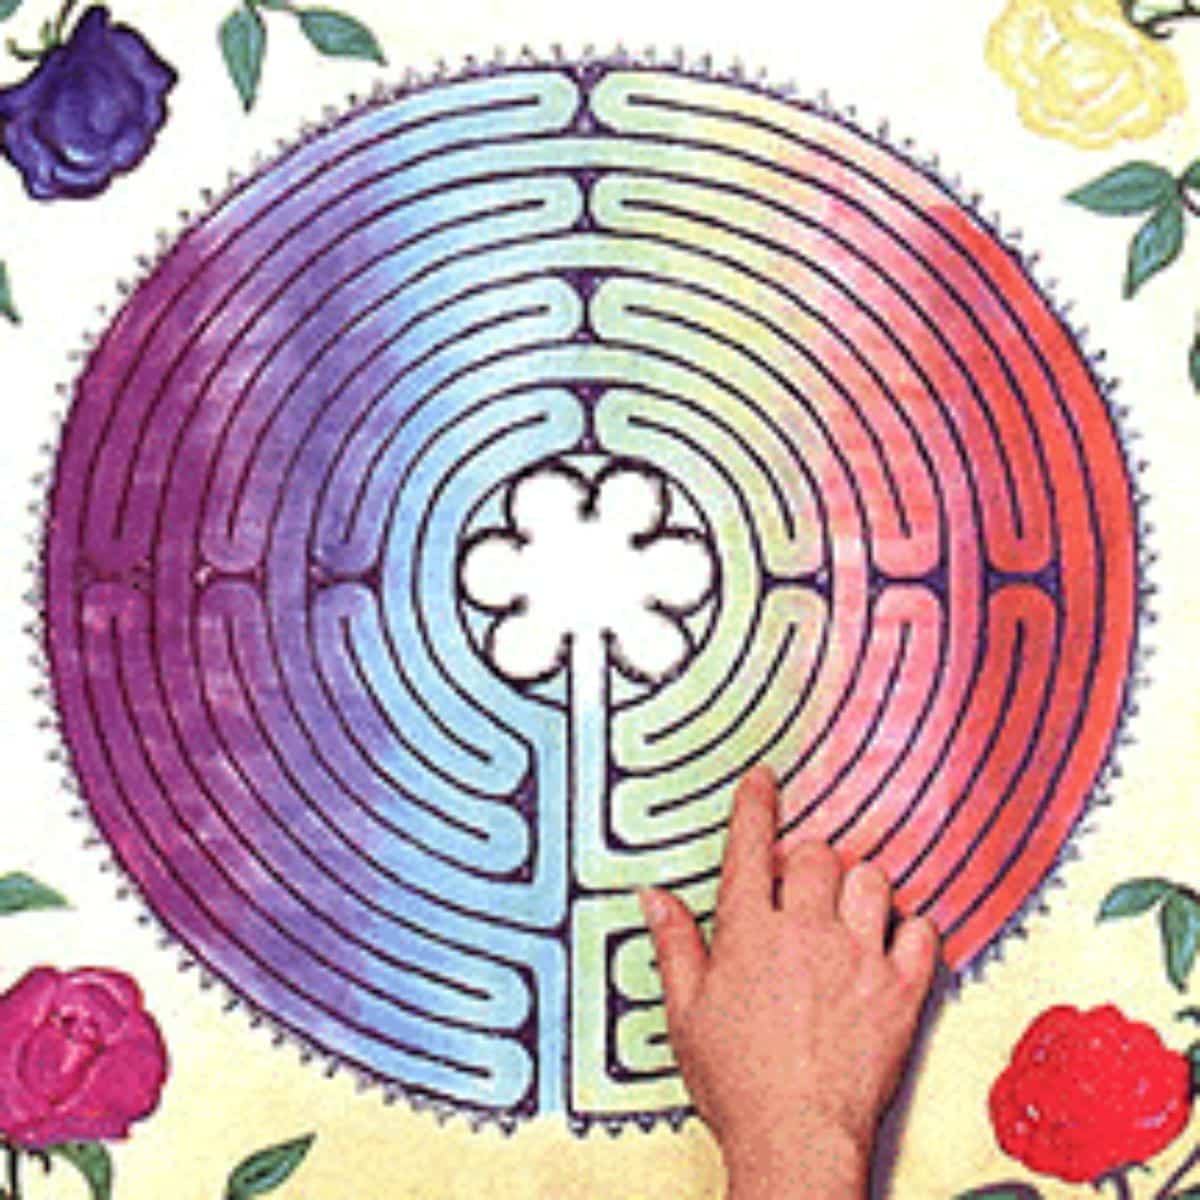 Hand touching a finger labyringht for meditation.